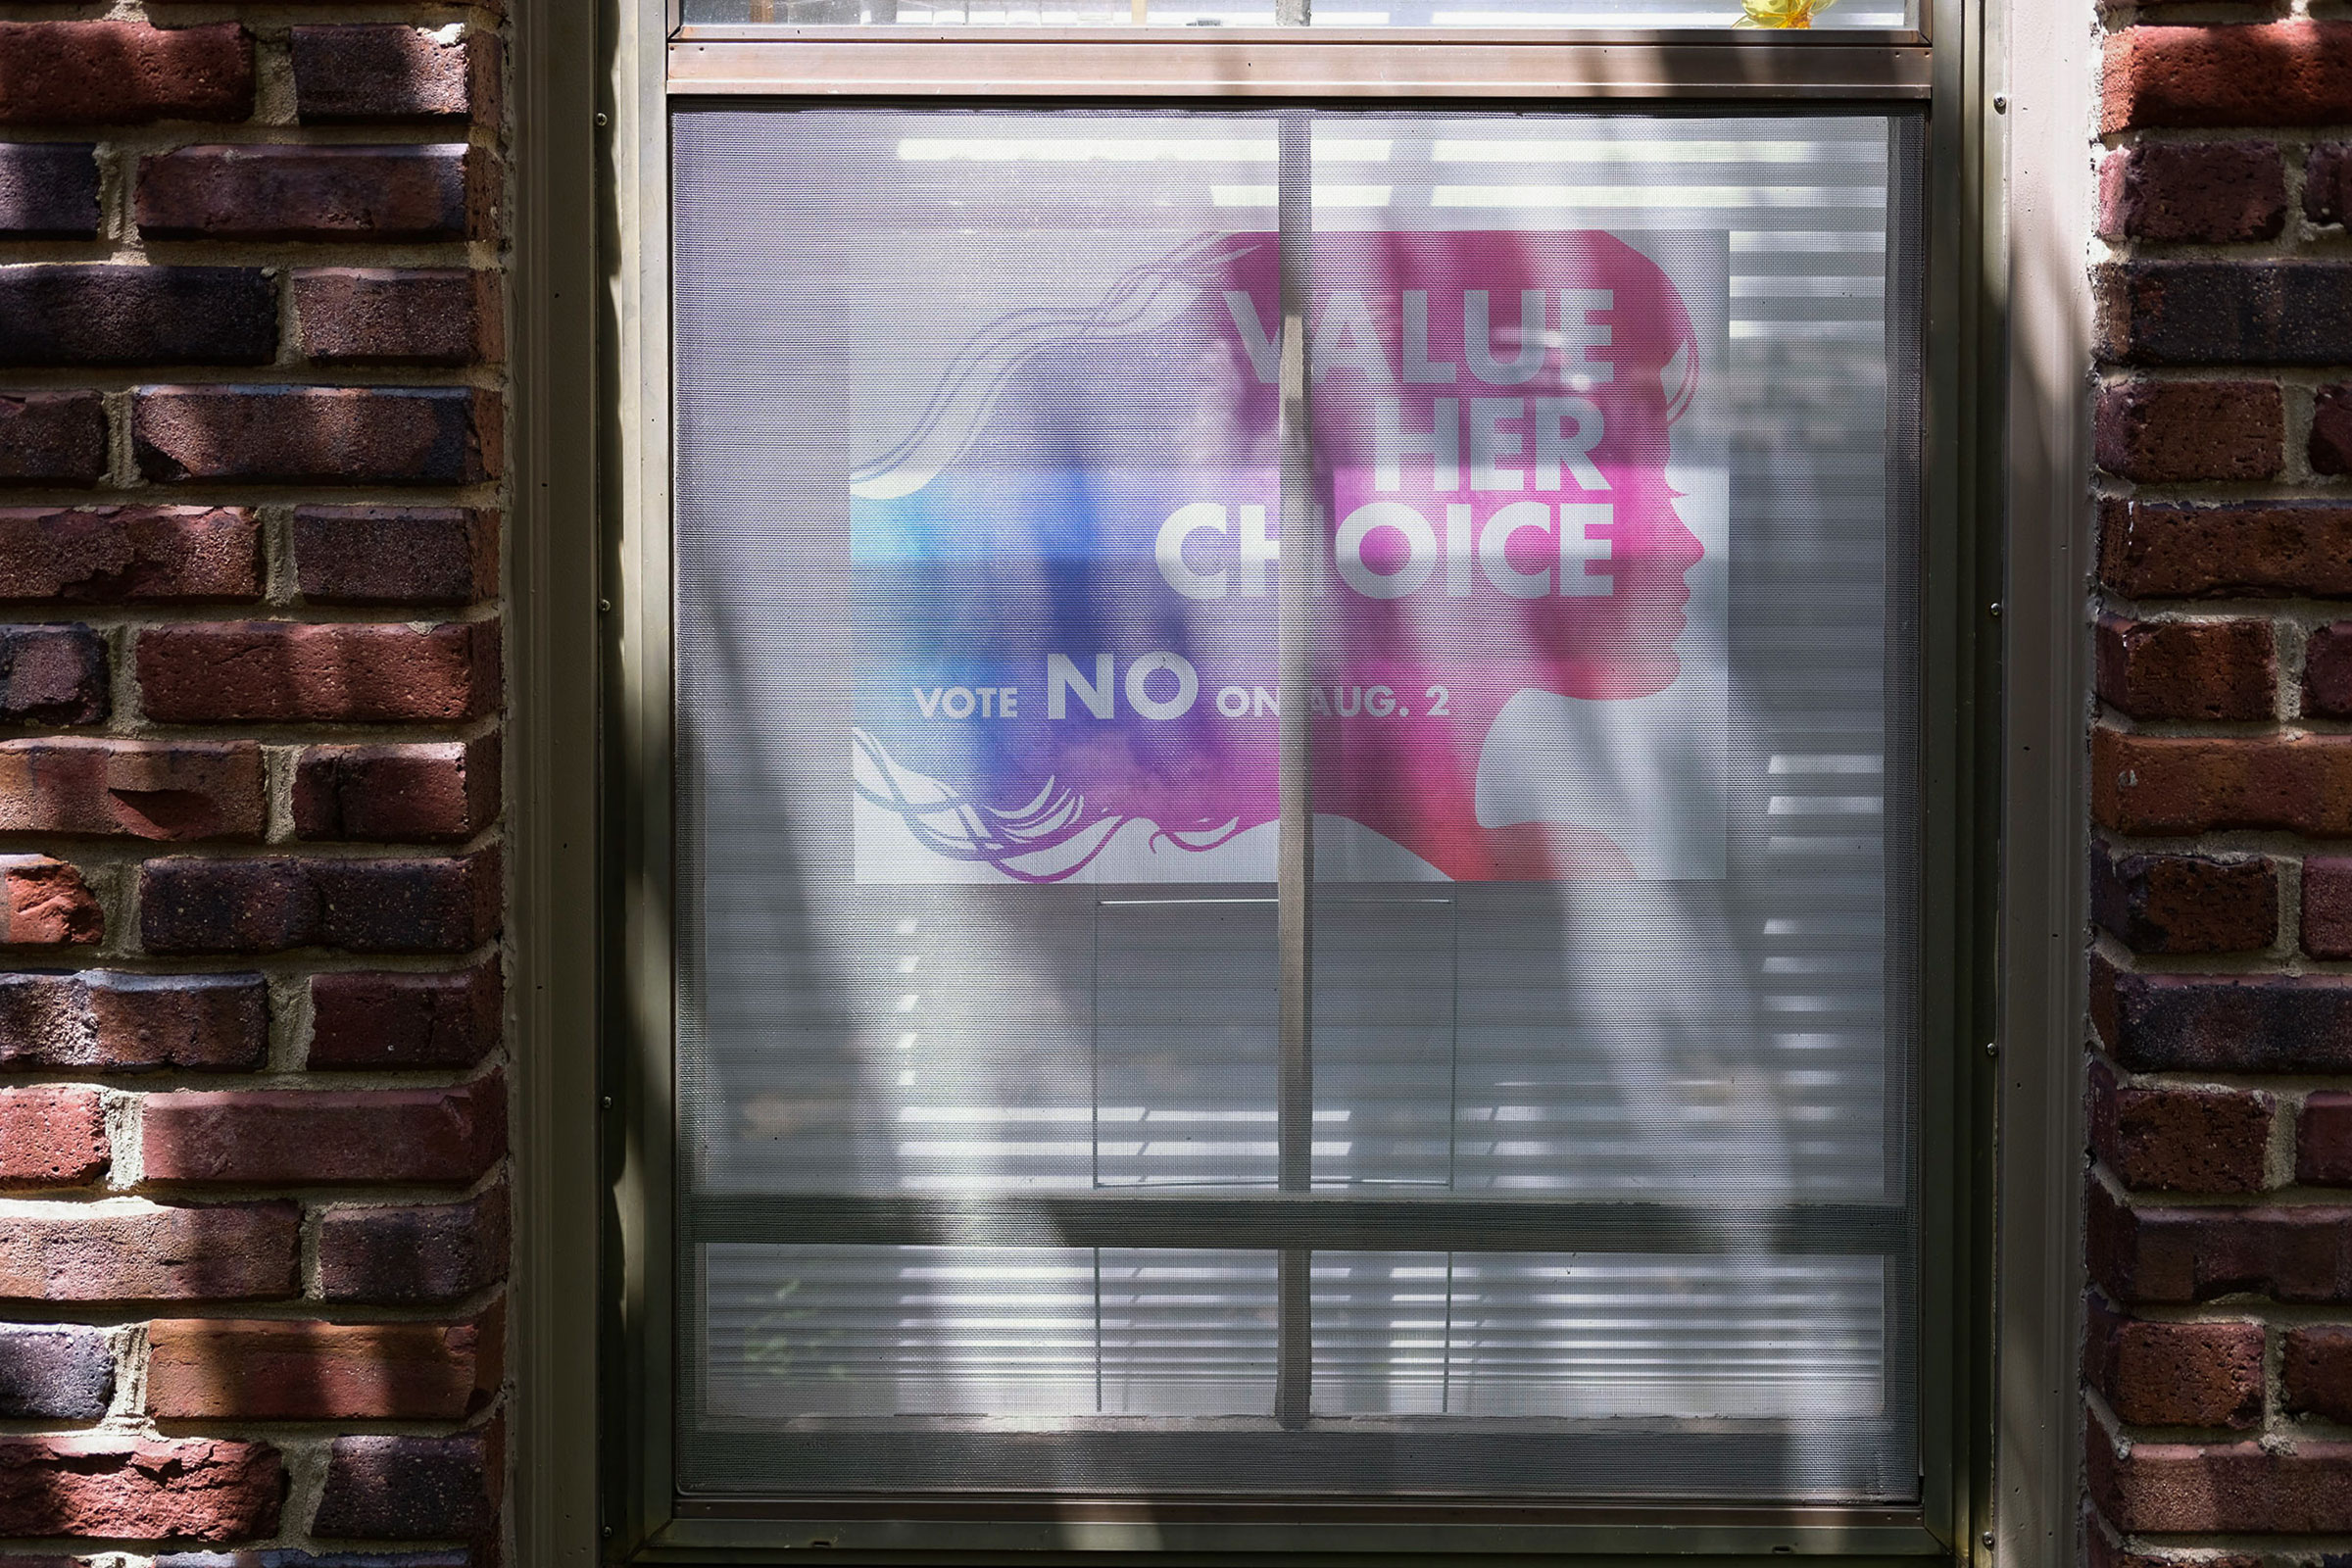 A 'Value Her Choice' sign is displayed in window of a home in Leawood, Kansas on July 23, 2022. Arin Yoon for TIME.